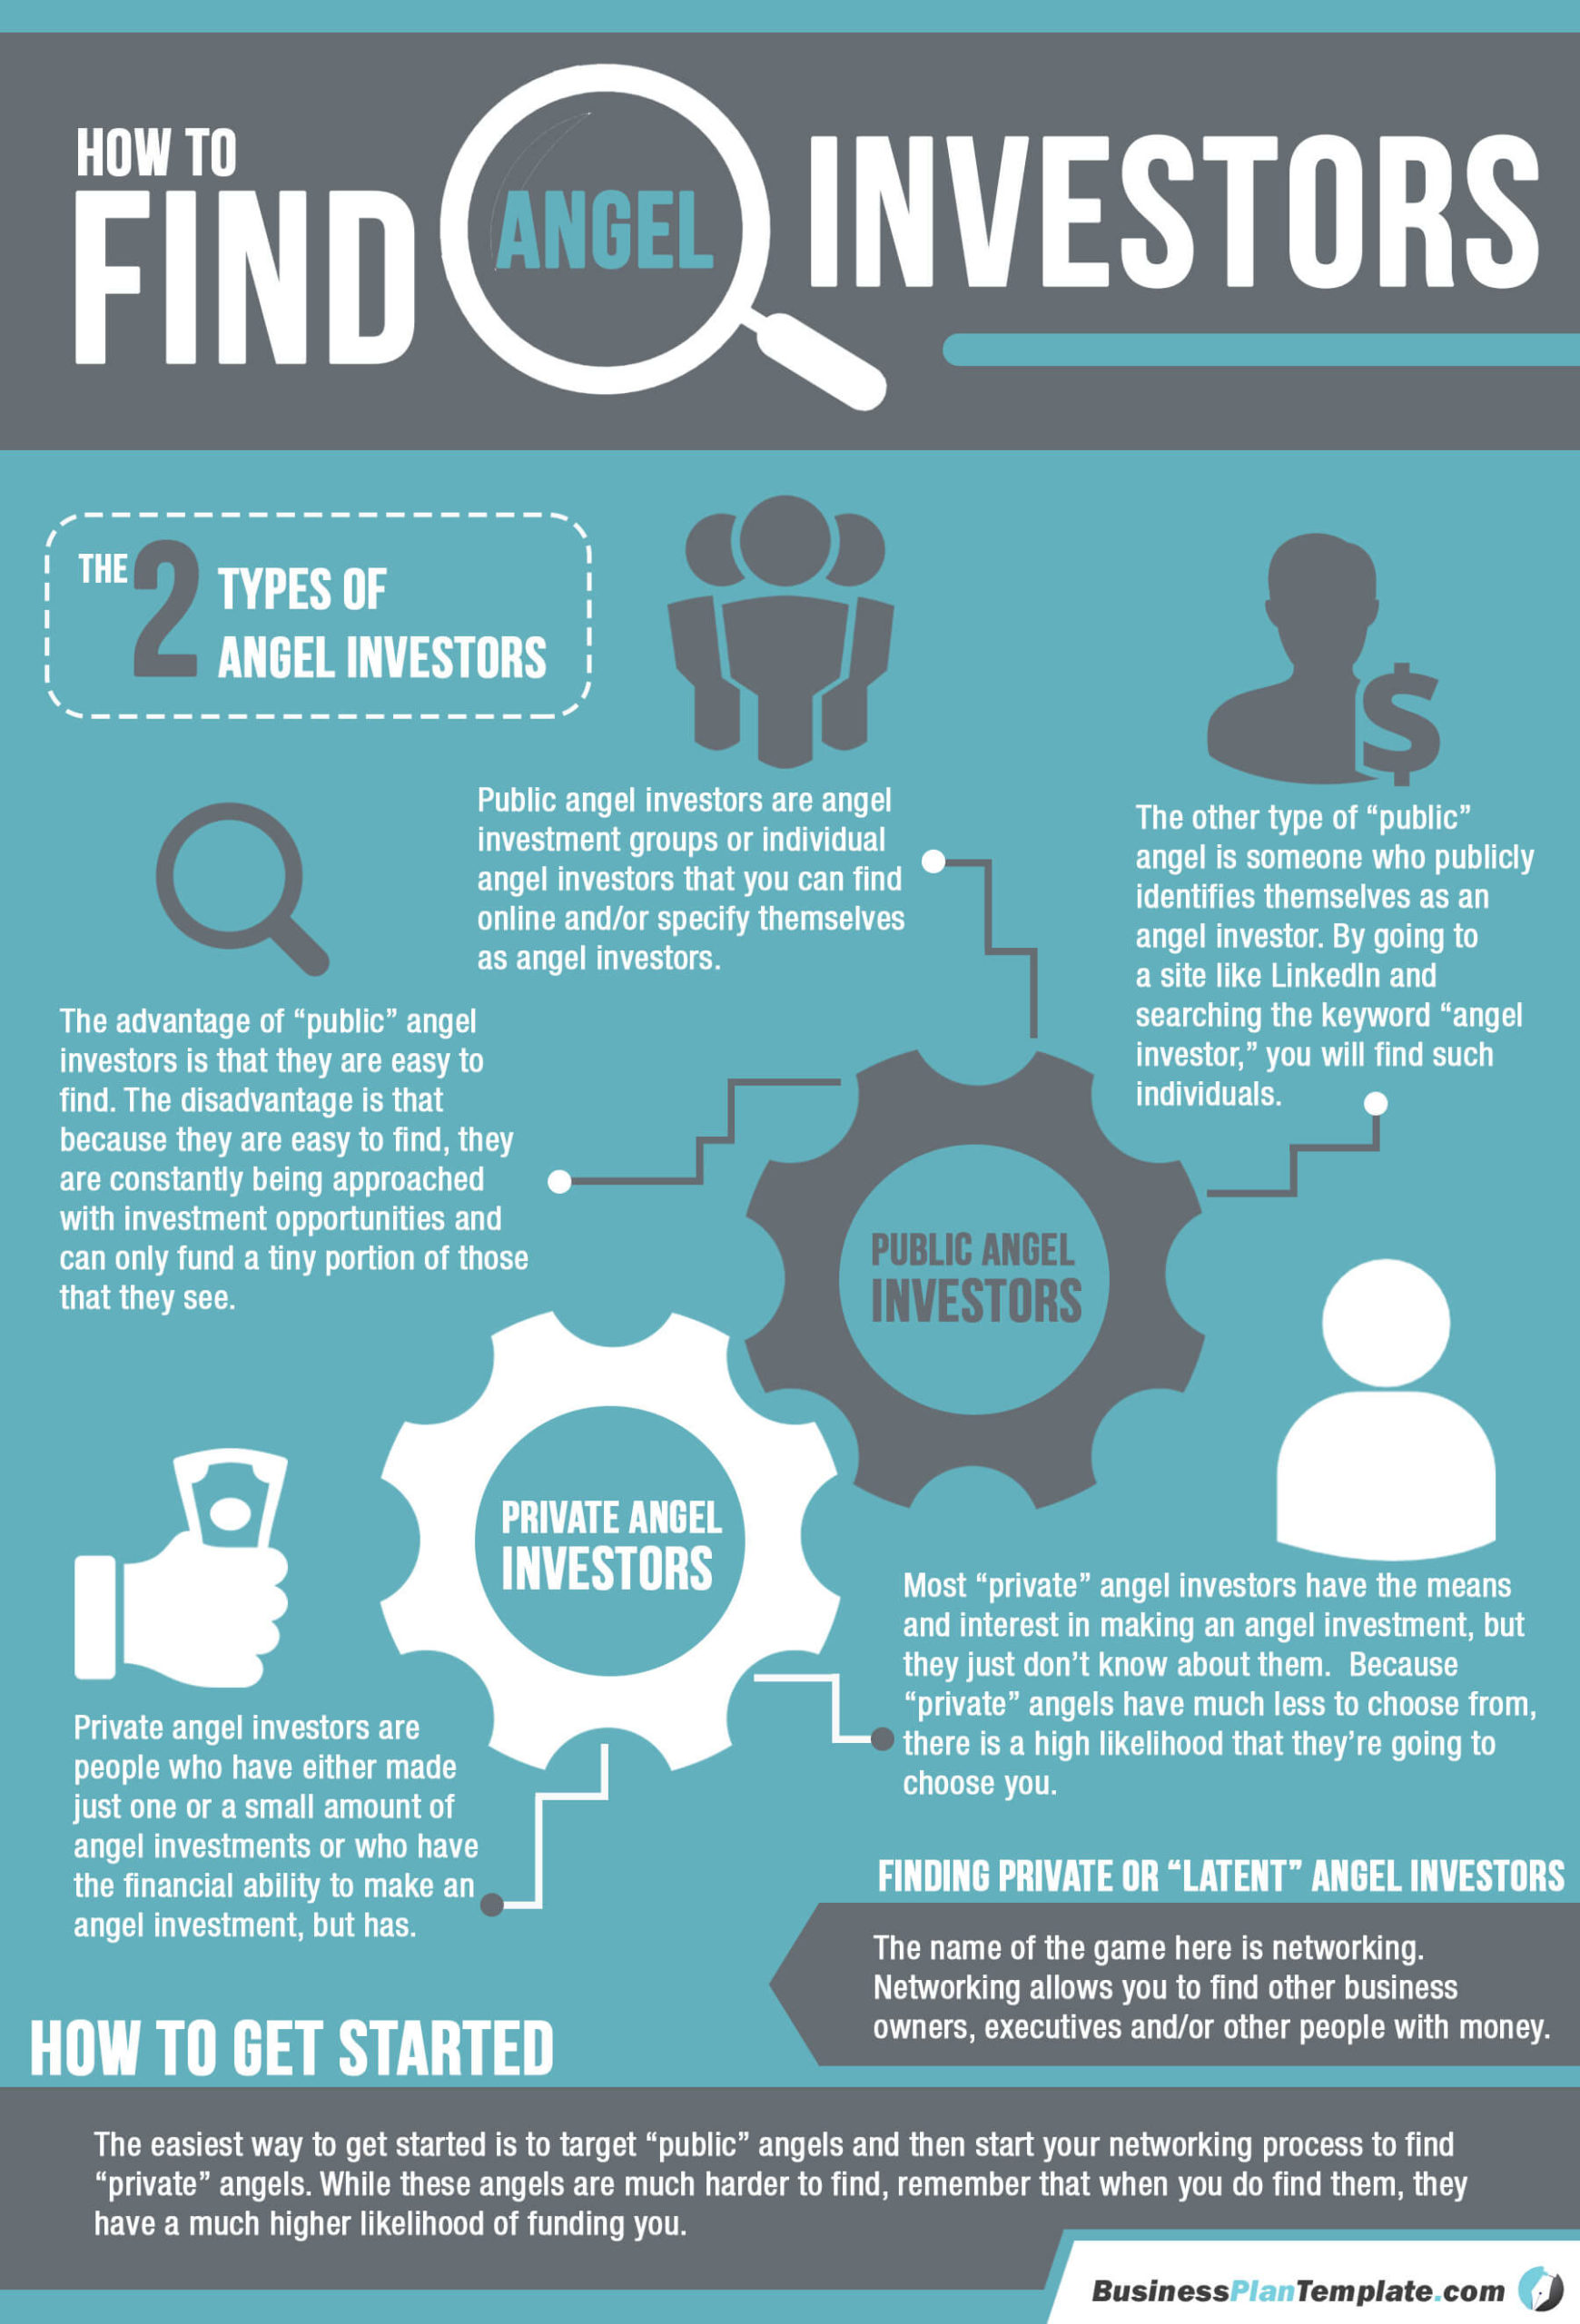 How-to-Find-Angel-Investors-Infographic-BPT